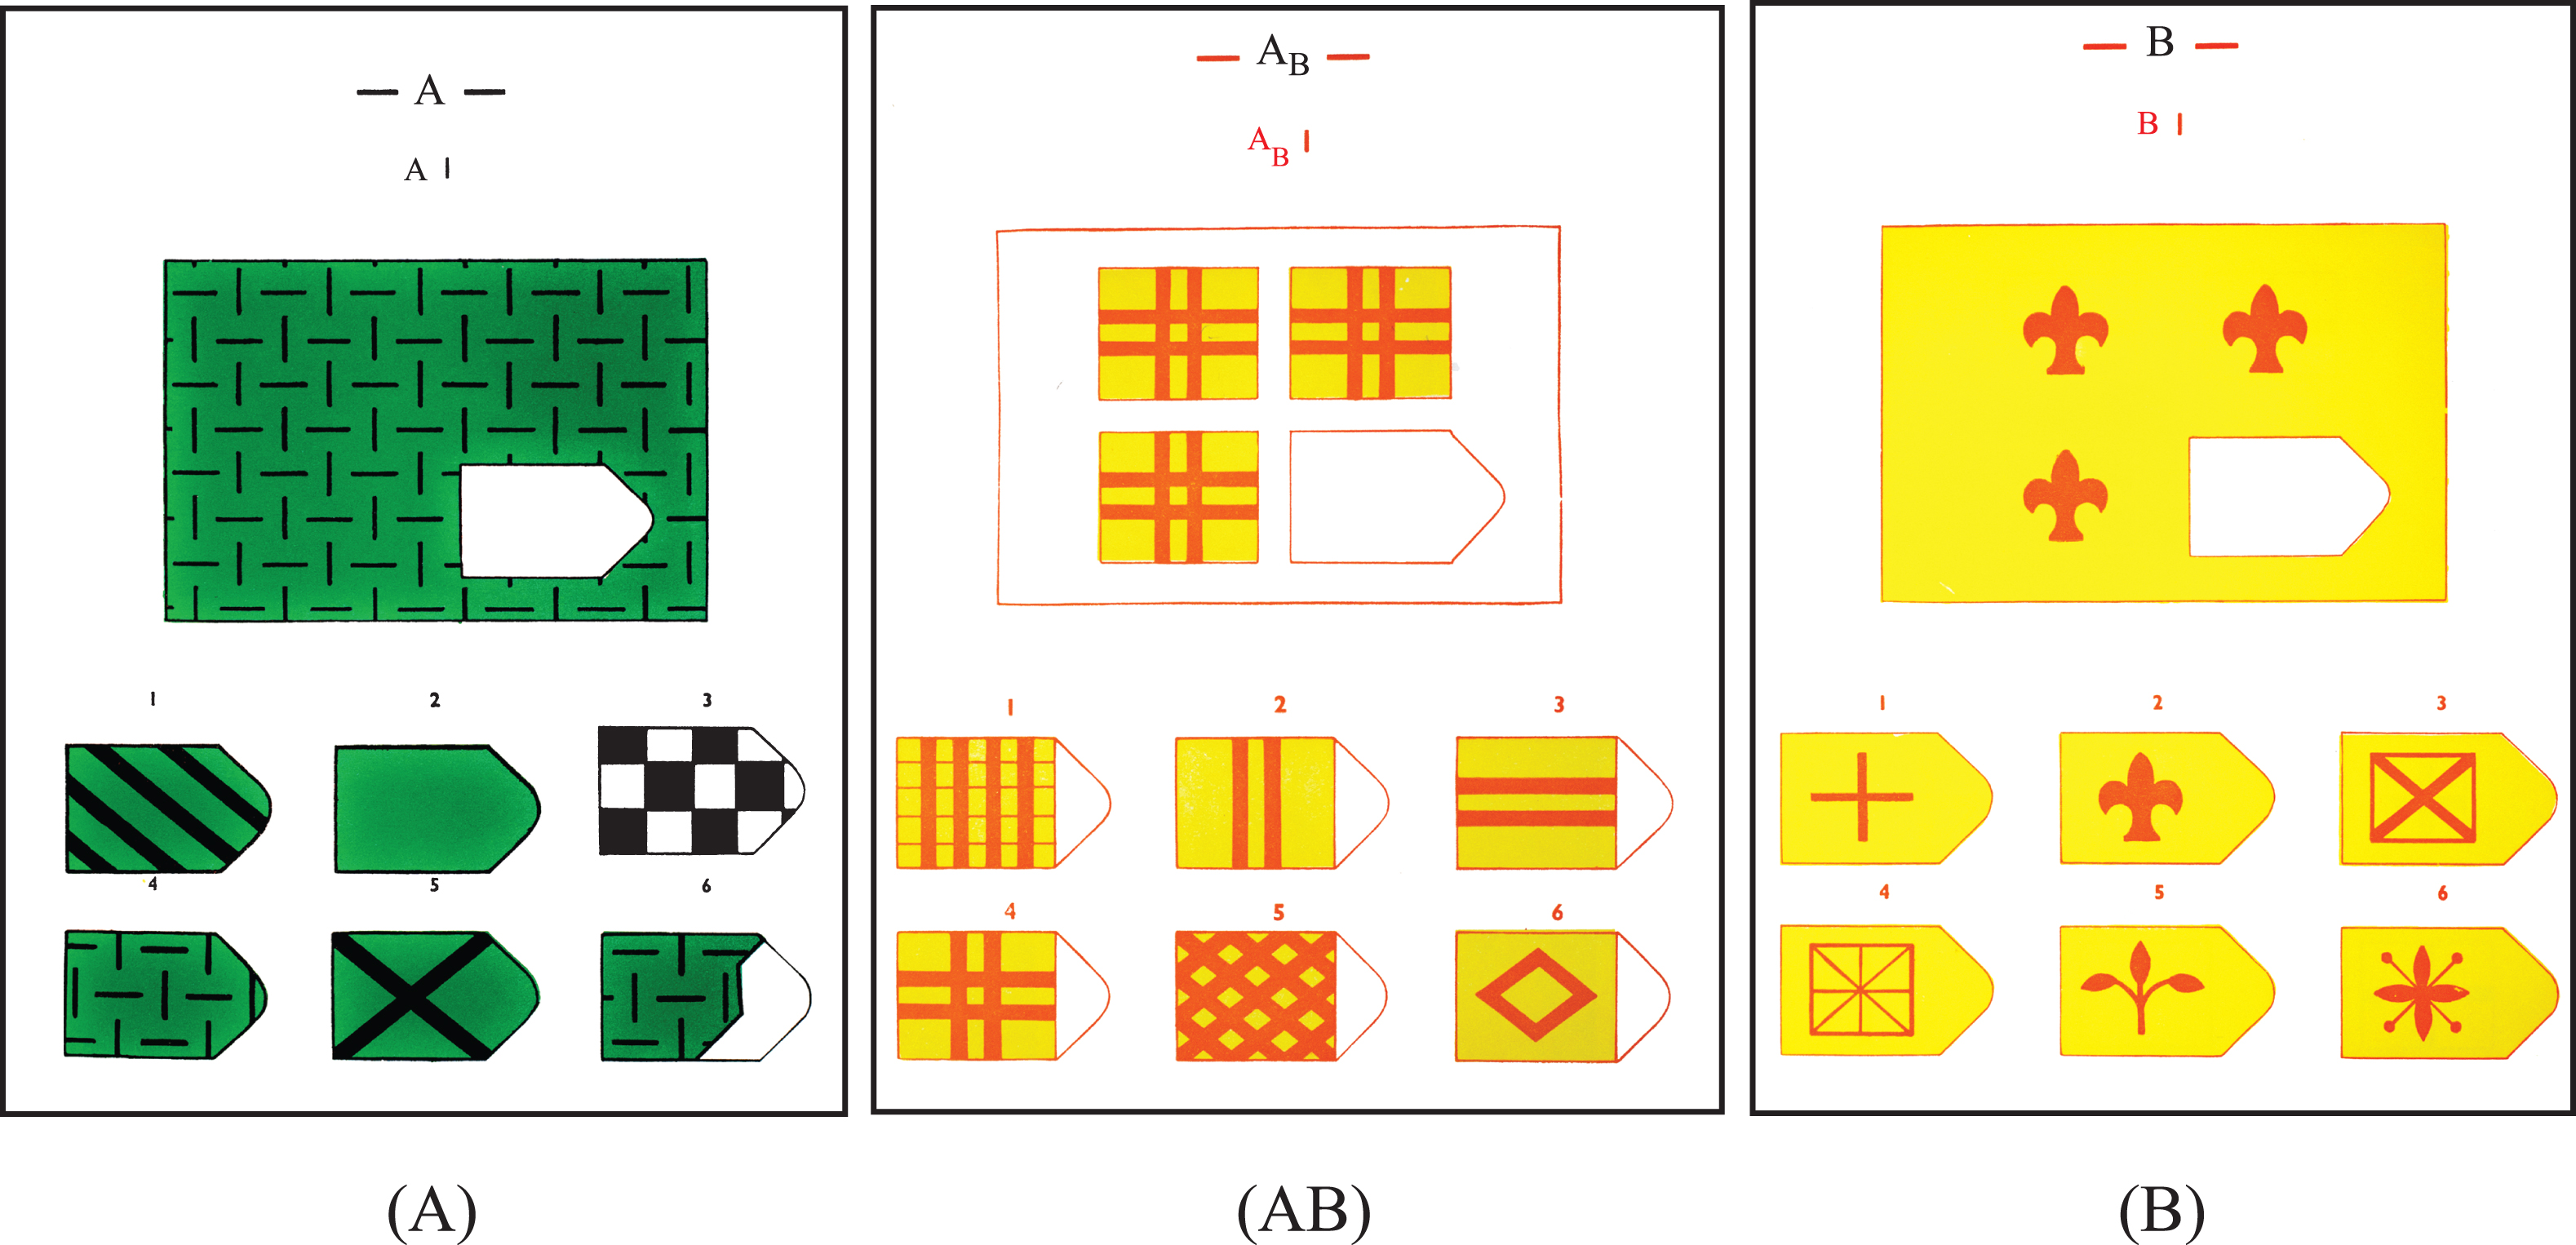 Examples of Task Sheets. A: Identification of a patch in a continuous pattern (correct item is on lower row furthest to the left). AB: Identification of a patch of a discrete pattern (correct item is lower row furthest to the left). B: Identification of a patch in a continuous pattern with discrete items (correct item is upper row in the middle).